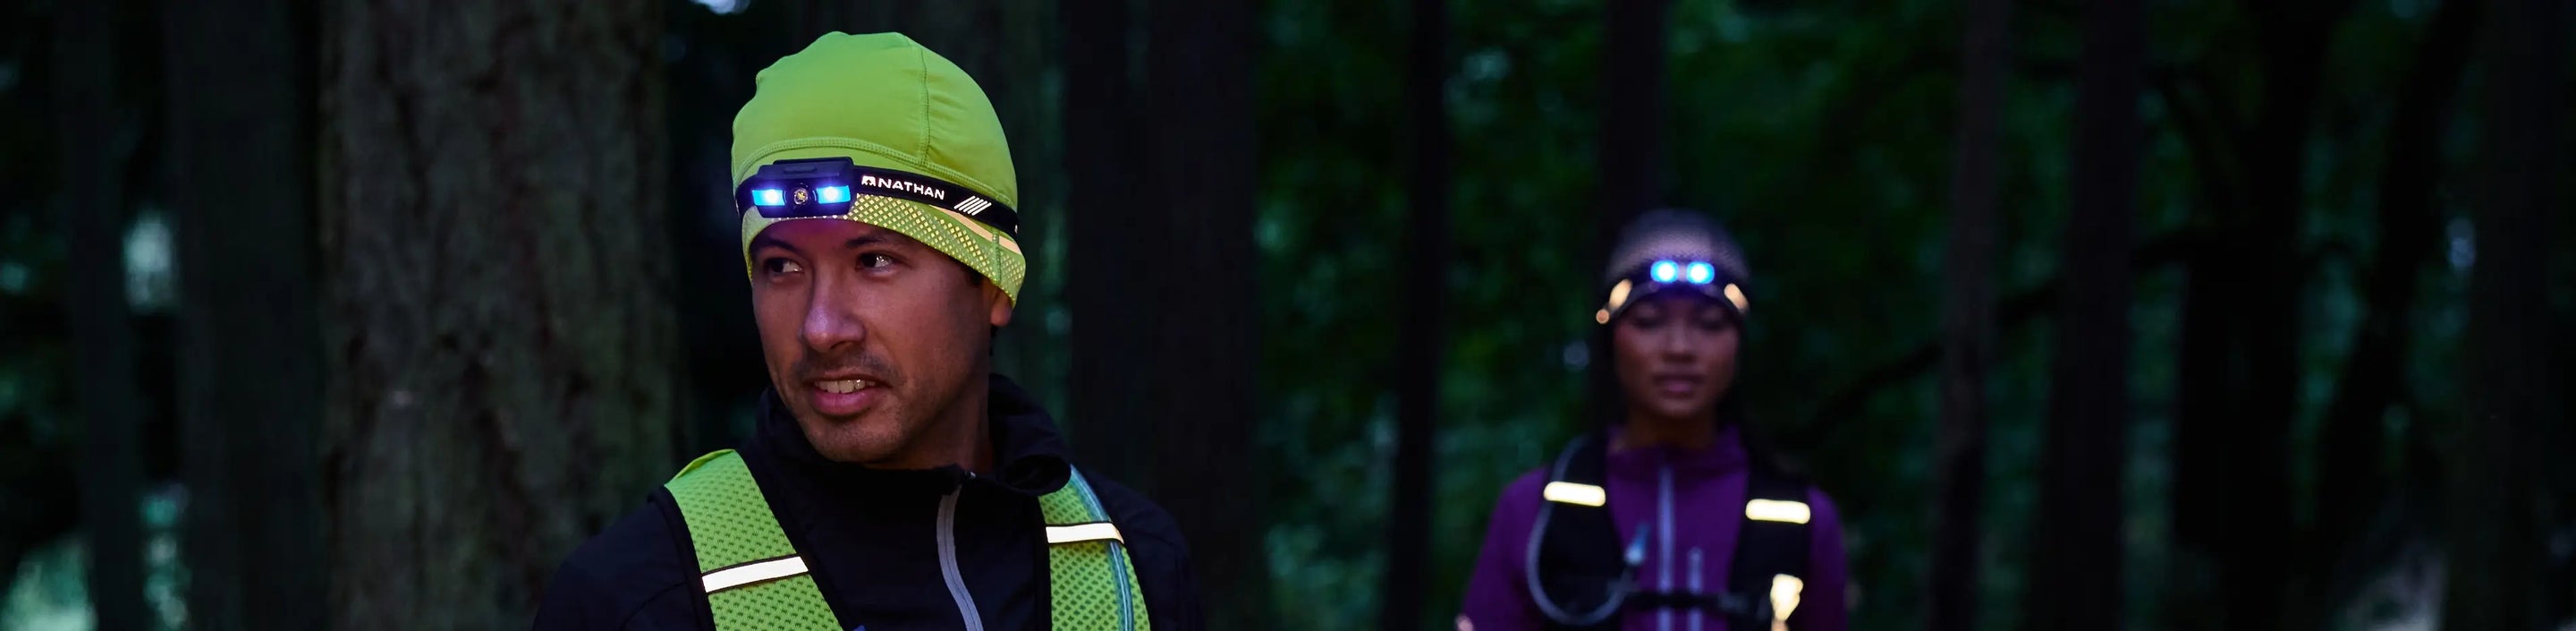 two runners wearing reflective gear and headlamps